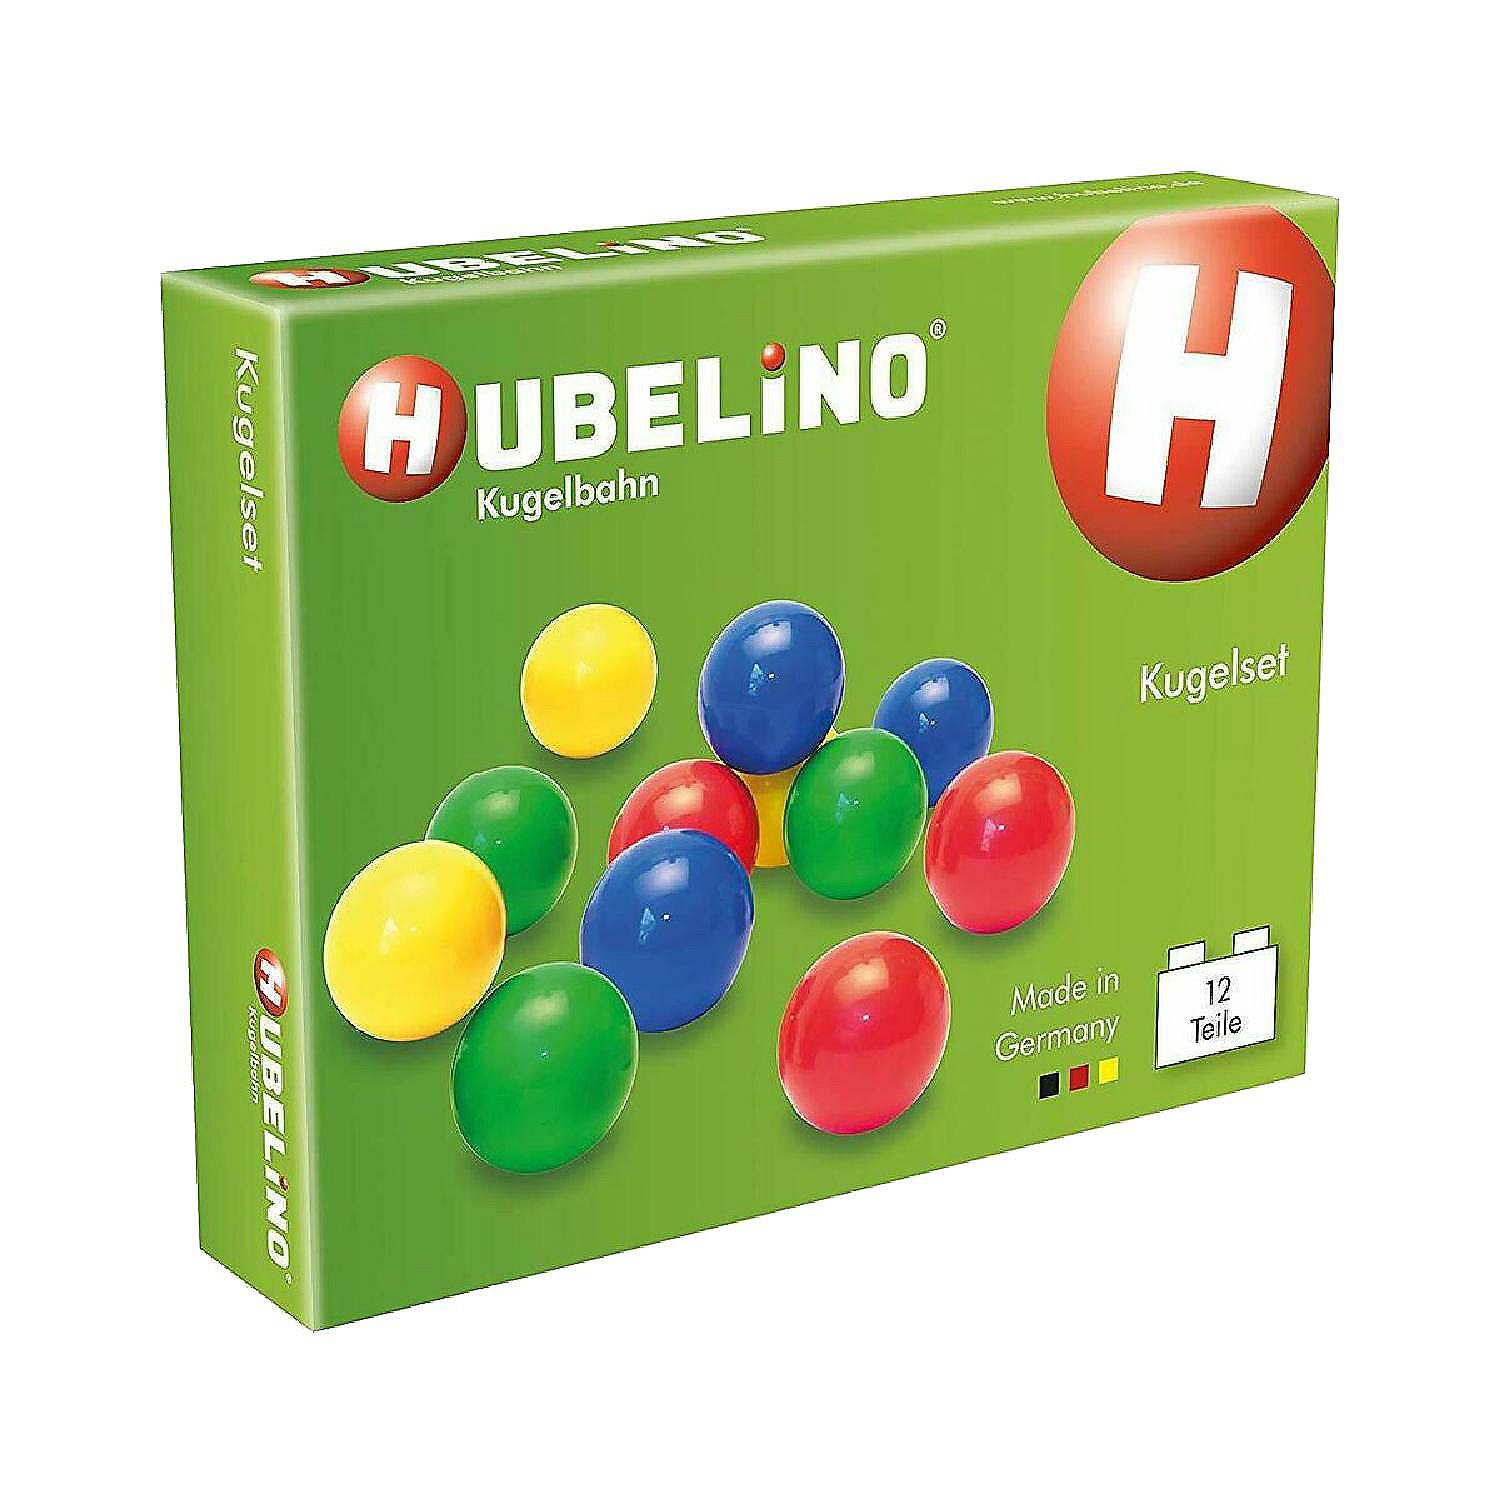 Set of 12 Marbles Hubelino Marble Run Made in Germany 